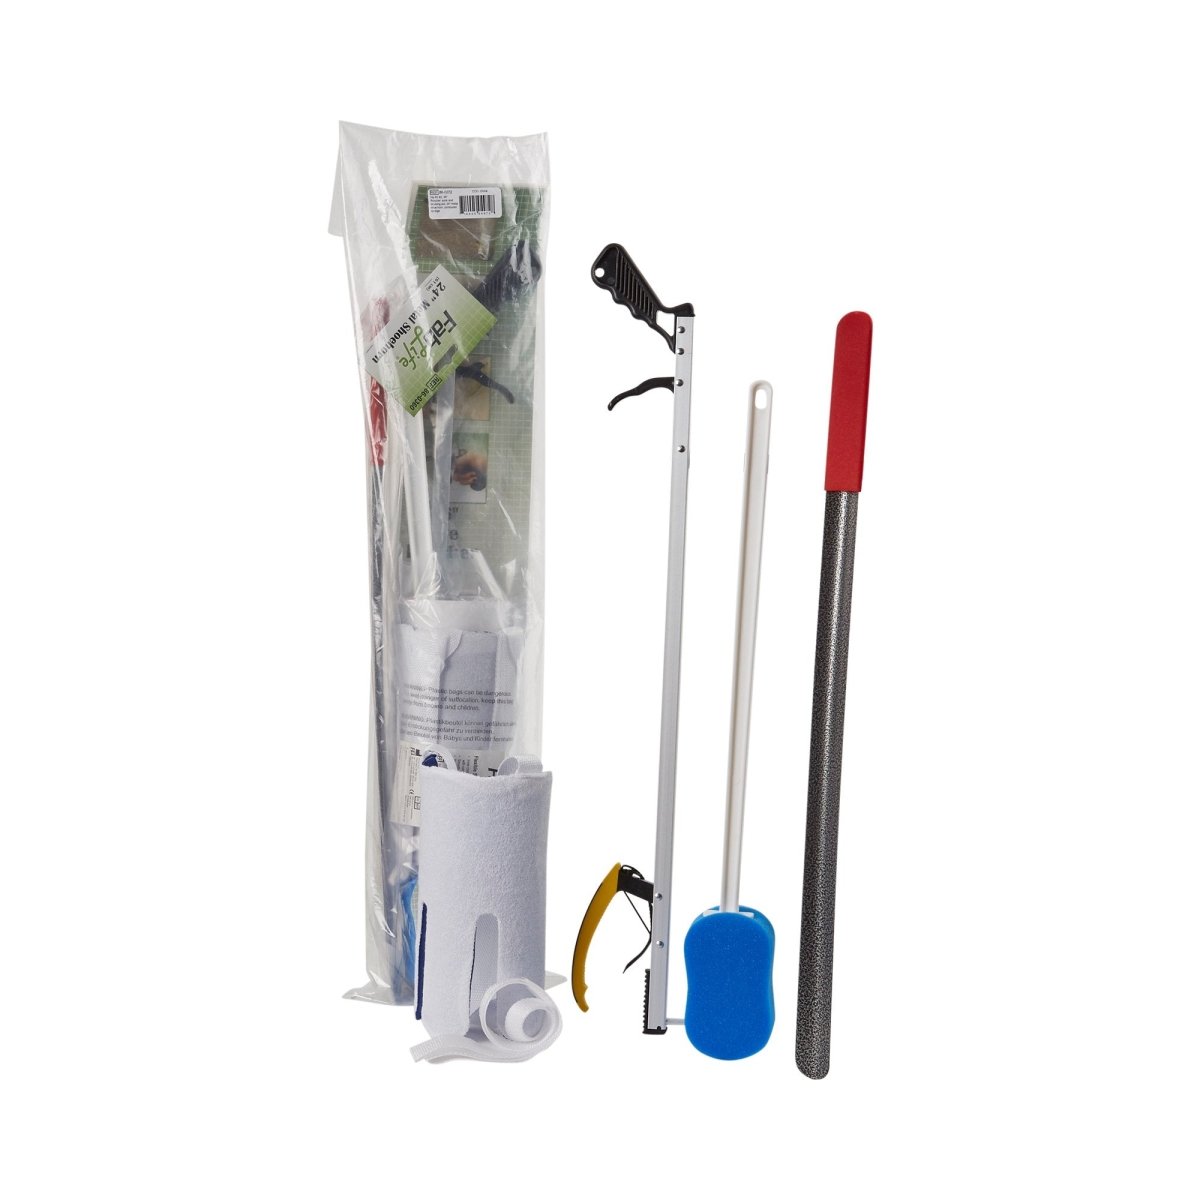 FabLife Hip Kit with 26 Inch Reacher and 24 Inch Metal Shoehorn - 864616_EA - 1